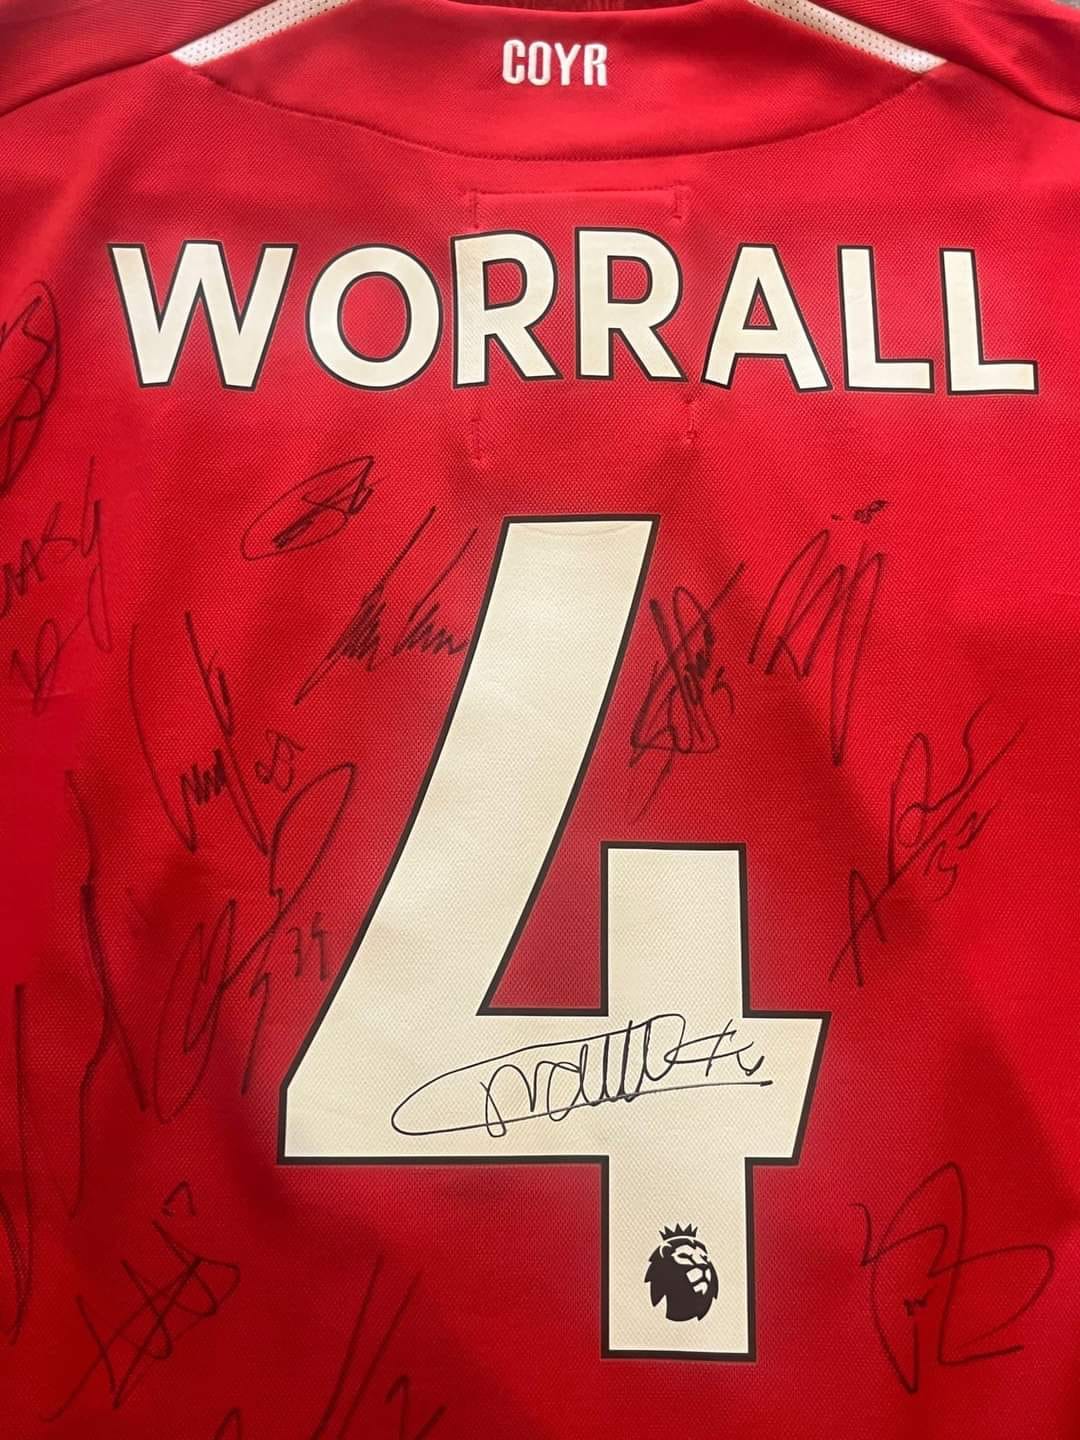 Two signed Nottingham Forest shirts will be auctioned off at a charity fun day at The Blue Bell Inn, in Alfreton, on Saturday, August 12